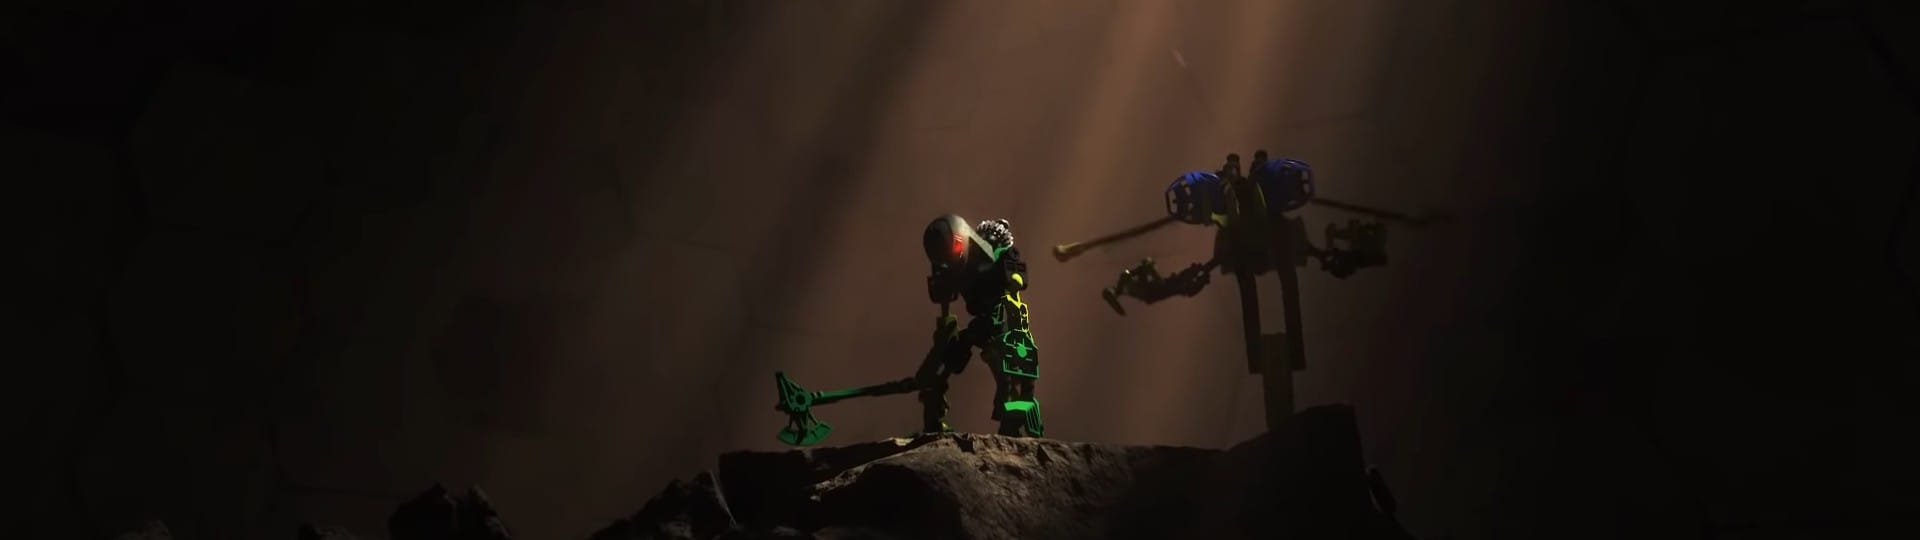 Bionicle: Quest for Mata Nui green